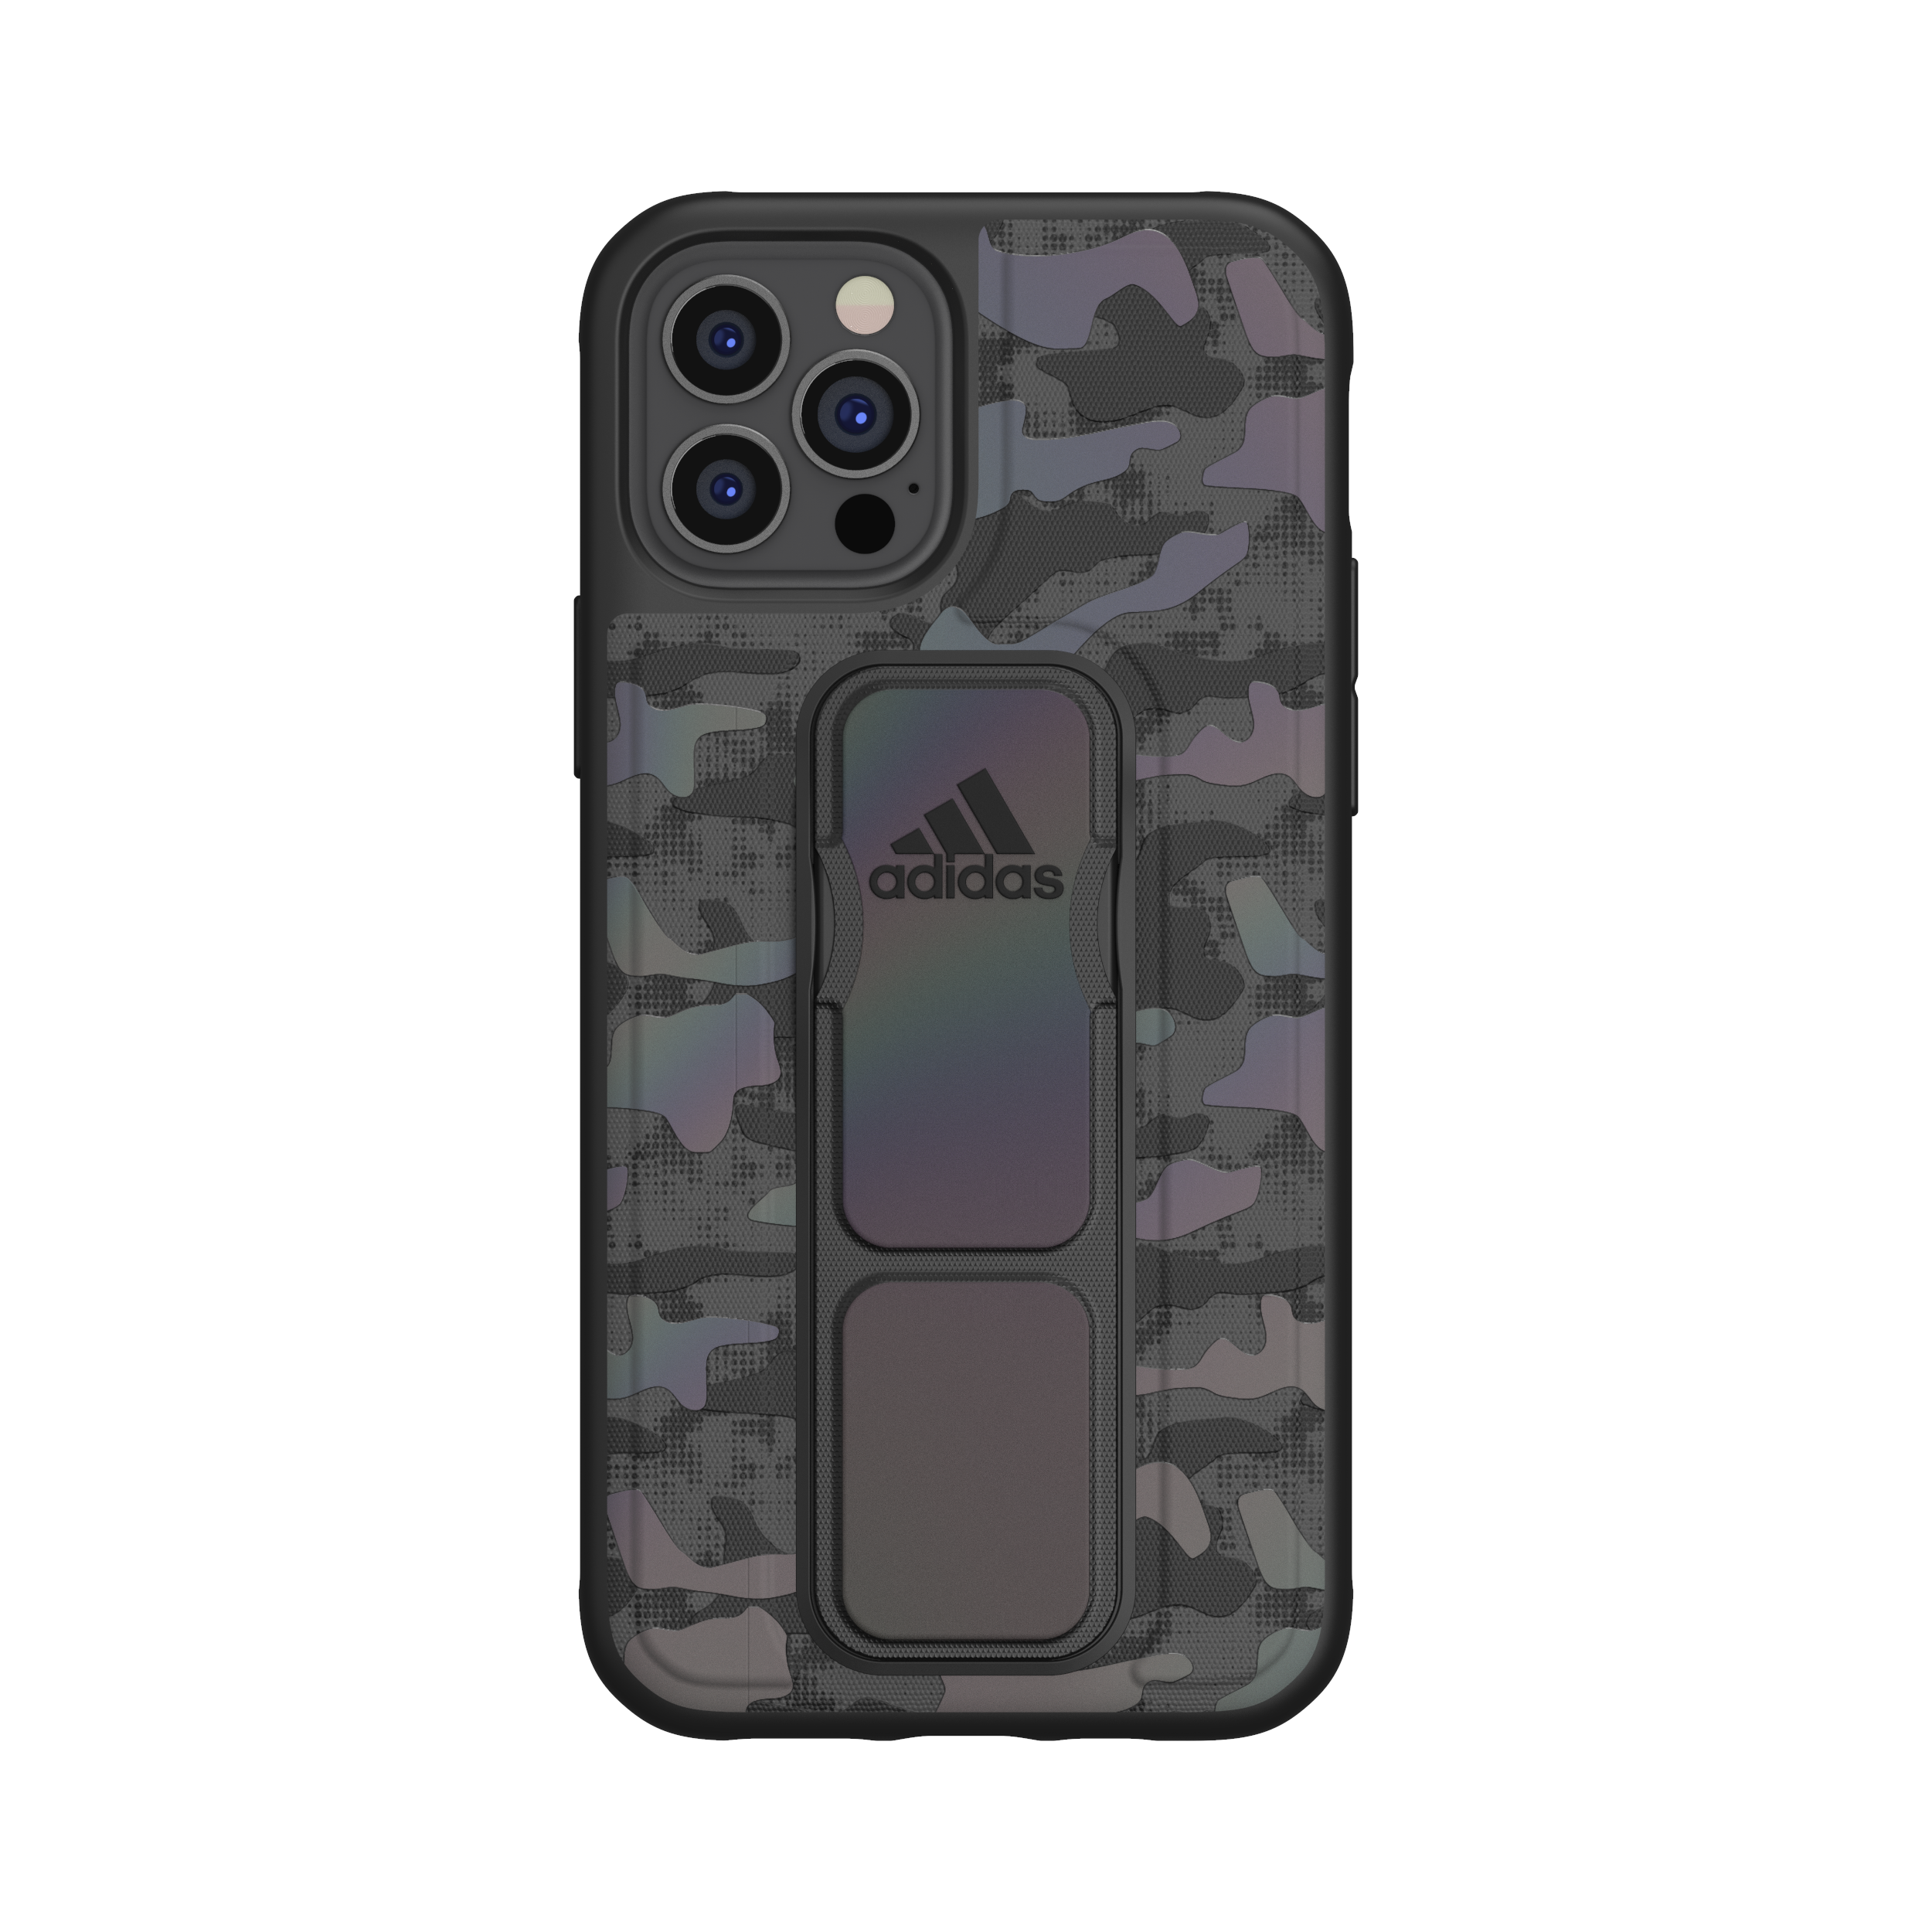 adidas SPORT Apple iPhone 12 / 12 Pro Camo Grip Case - Back cover w/ Grip or Stand, Scratch & Drop Protection w/ TPU Bumper, Wireless Charging Compatible - Black